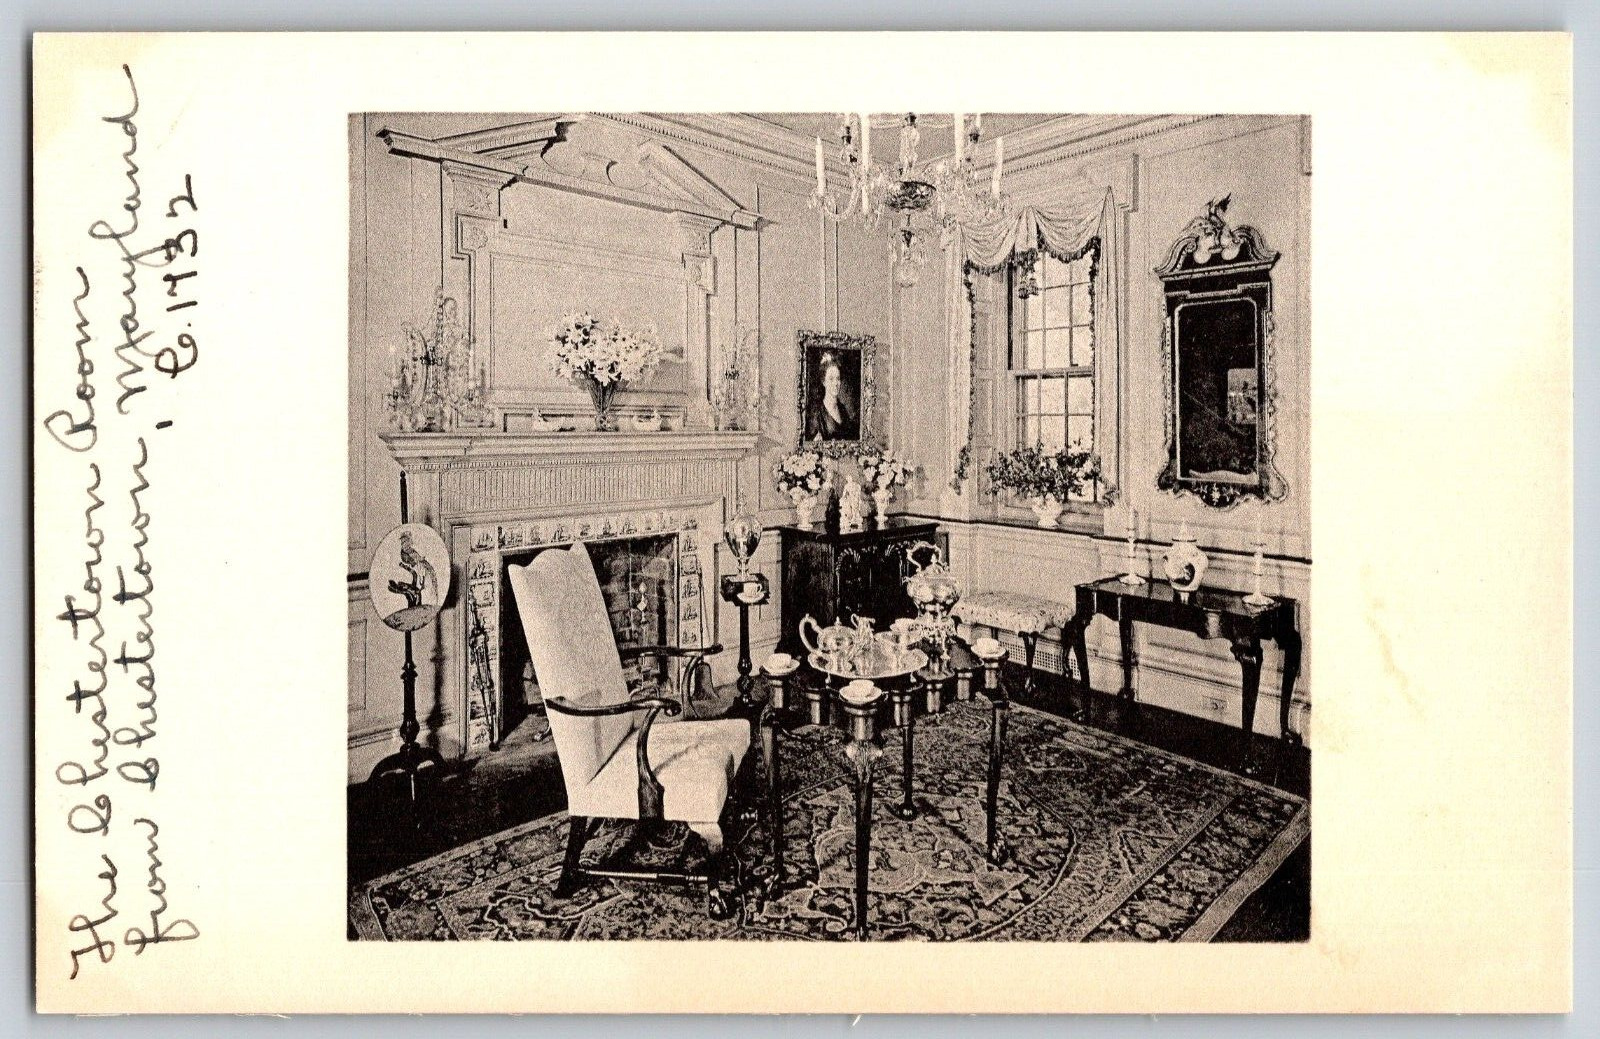 Maryland MD - A Chestertown Room - Vintage Postcard - Unposted